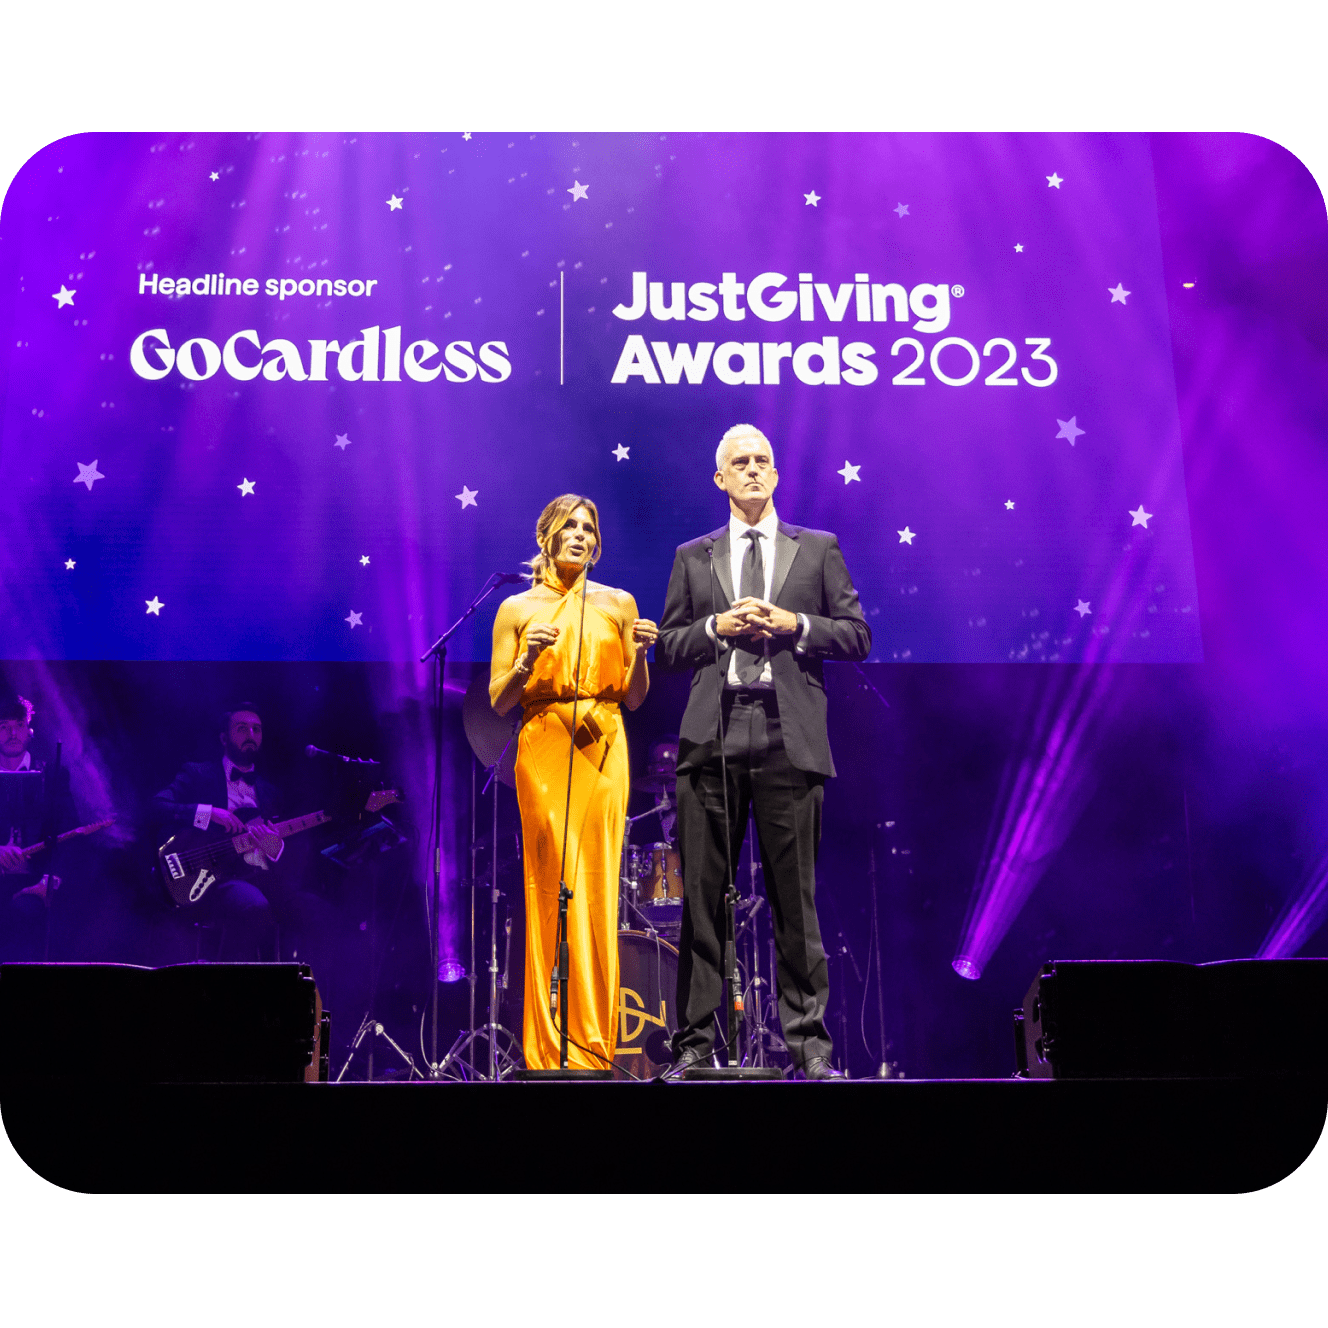 Reflecting on the GoCardless JustGiving Awards 2023